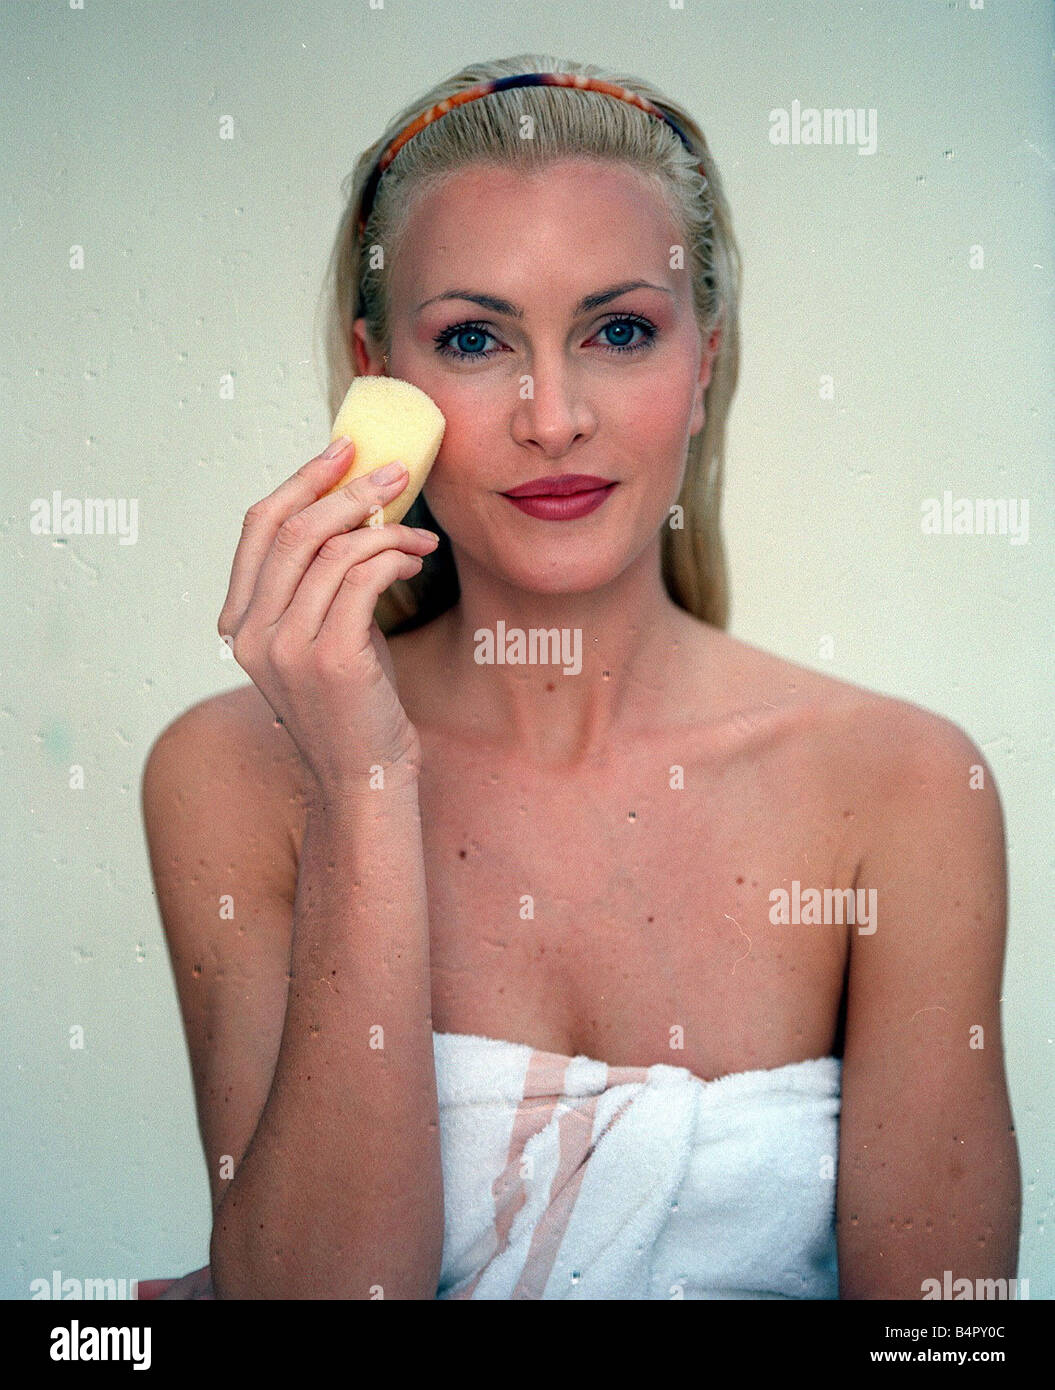 Caprice model with skin care product Beauty regime Beauty products April 1999 Stock Photo